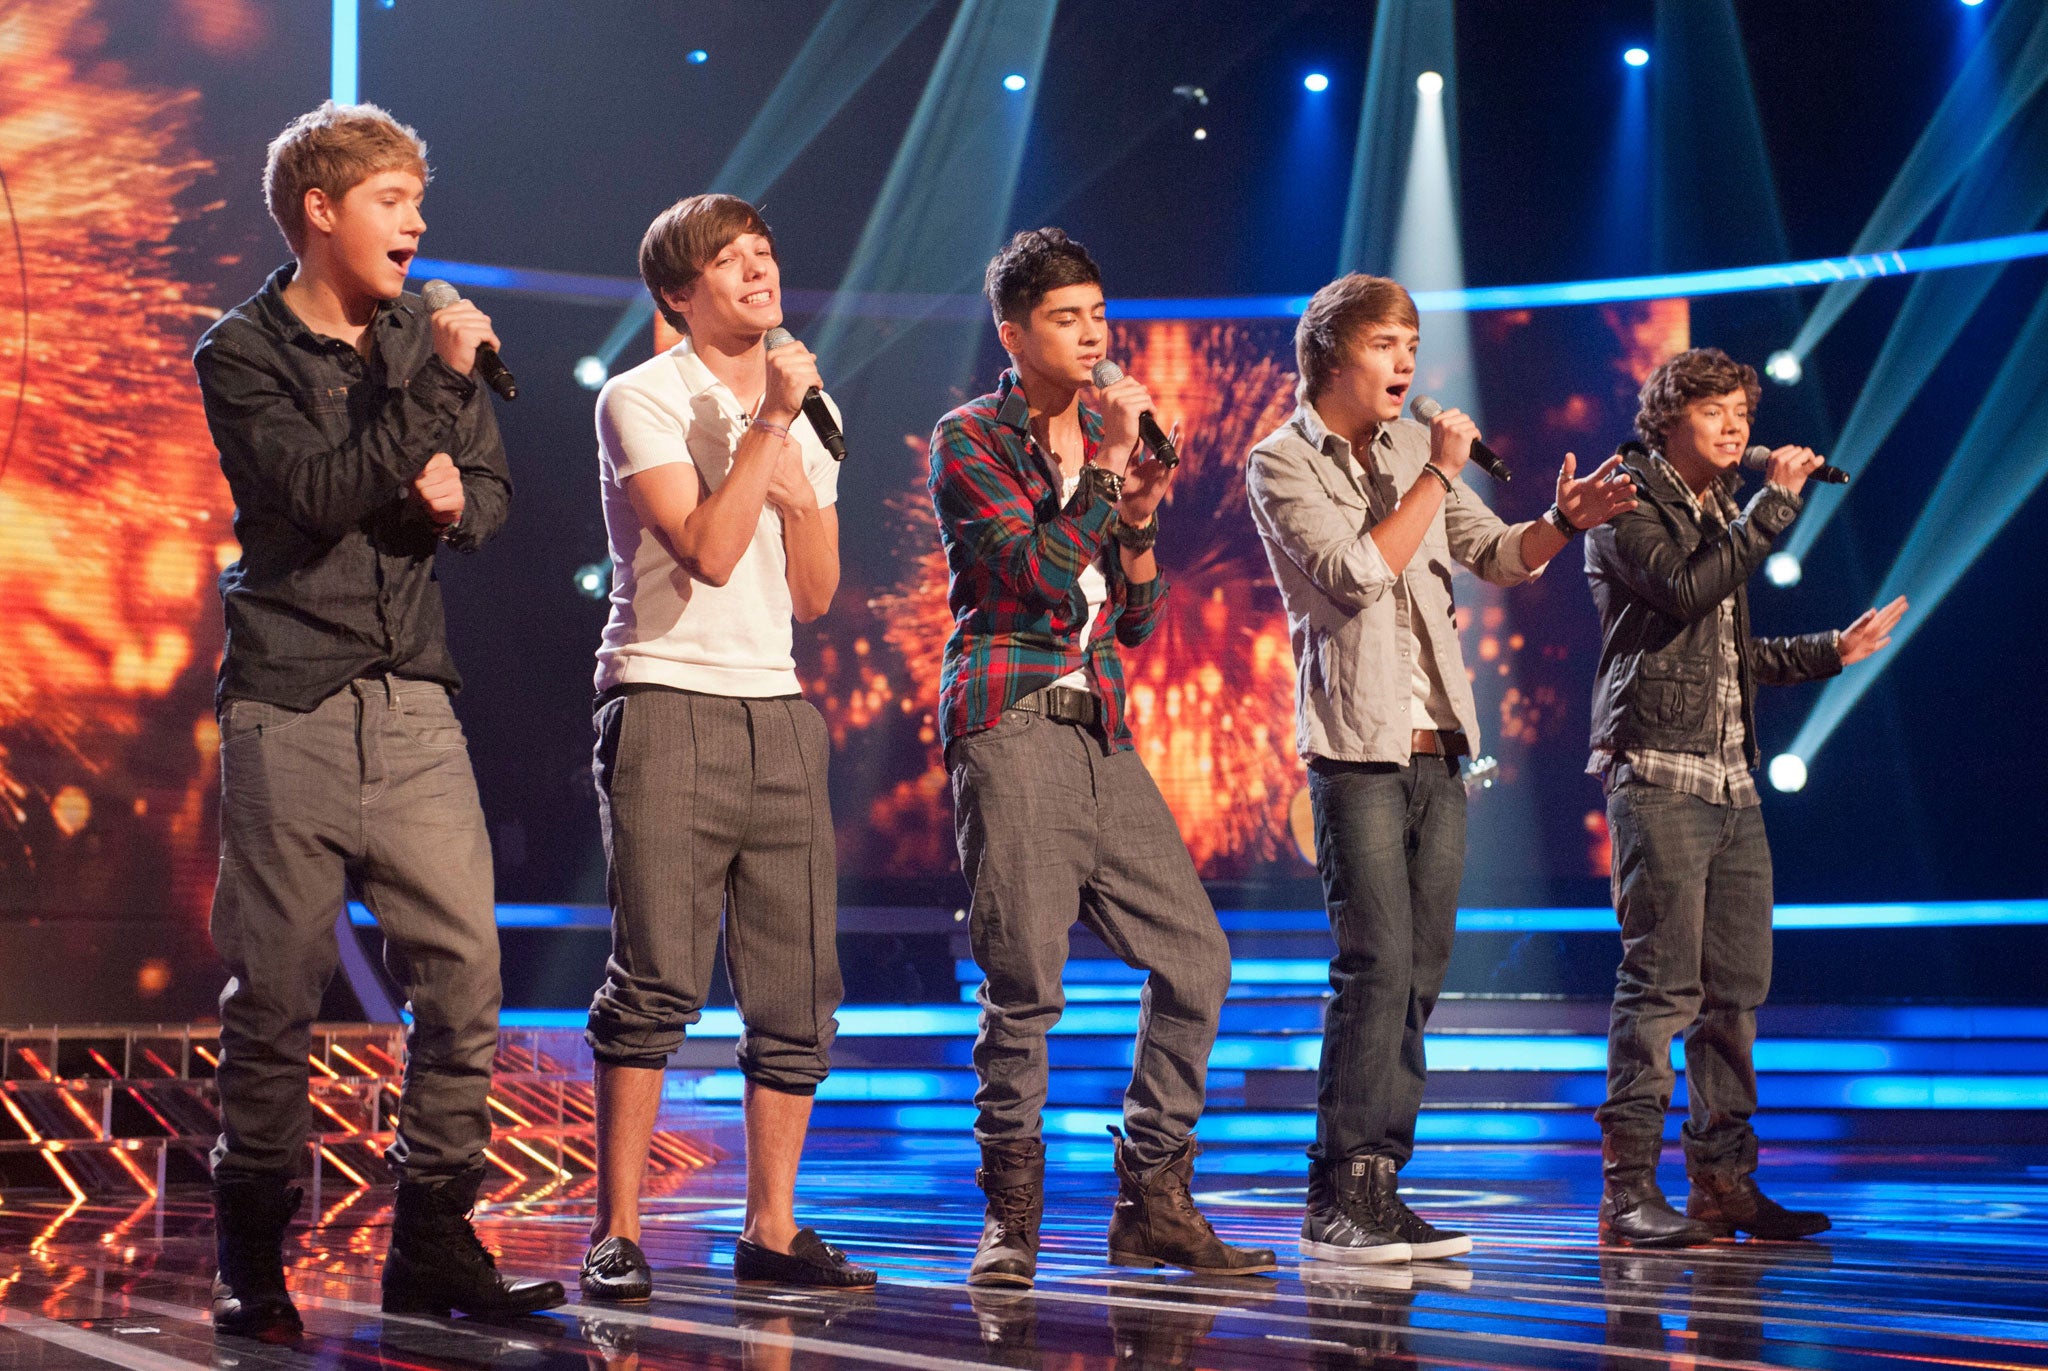 One Direction came third in 'The X Factor' in 2010